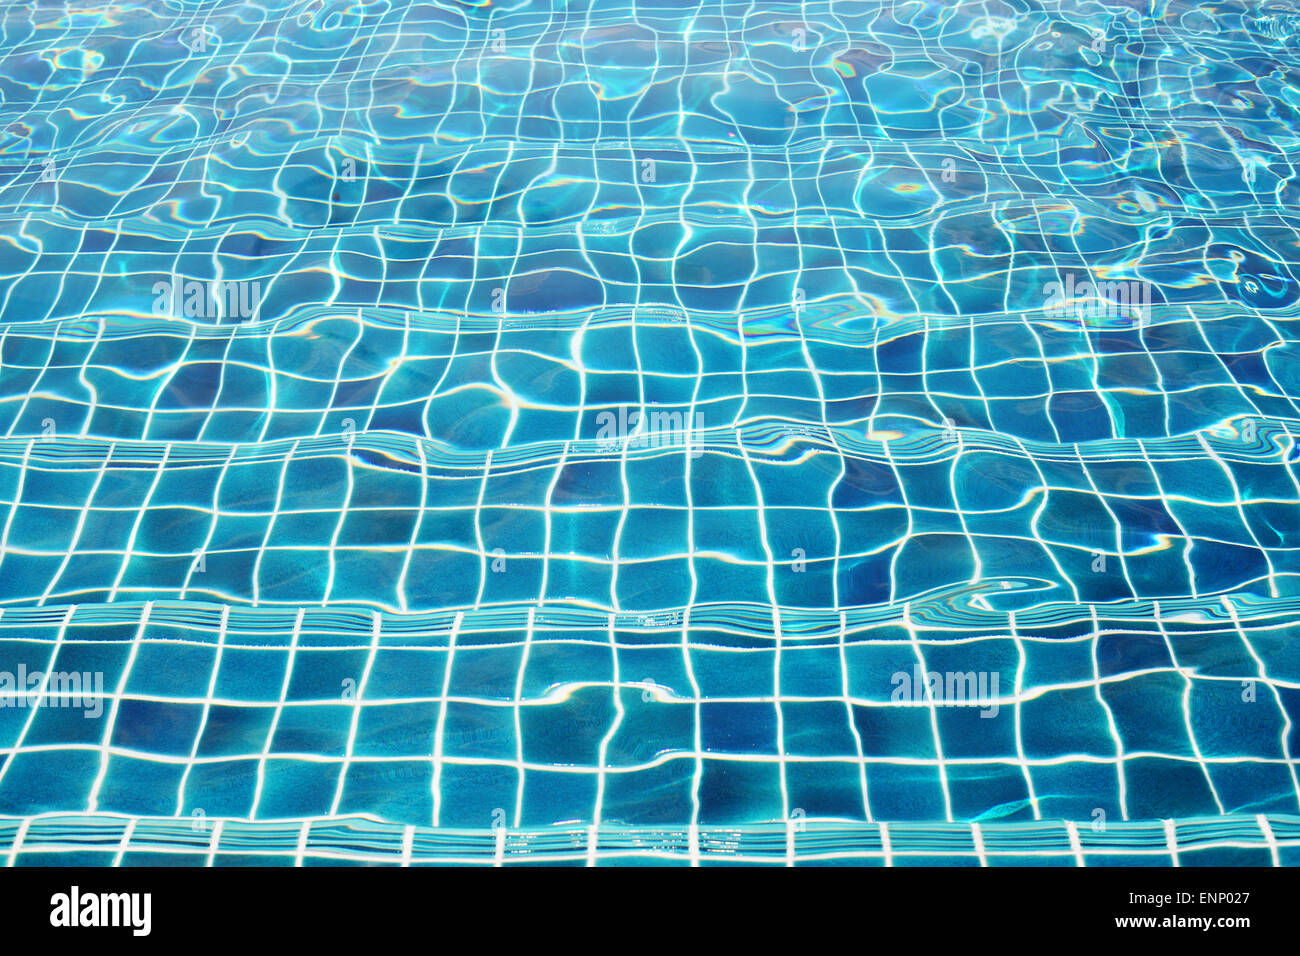 Blue ceramic wall tiles and details of surface on swimming pool background Stock Photo